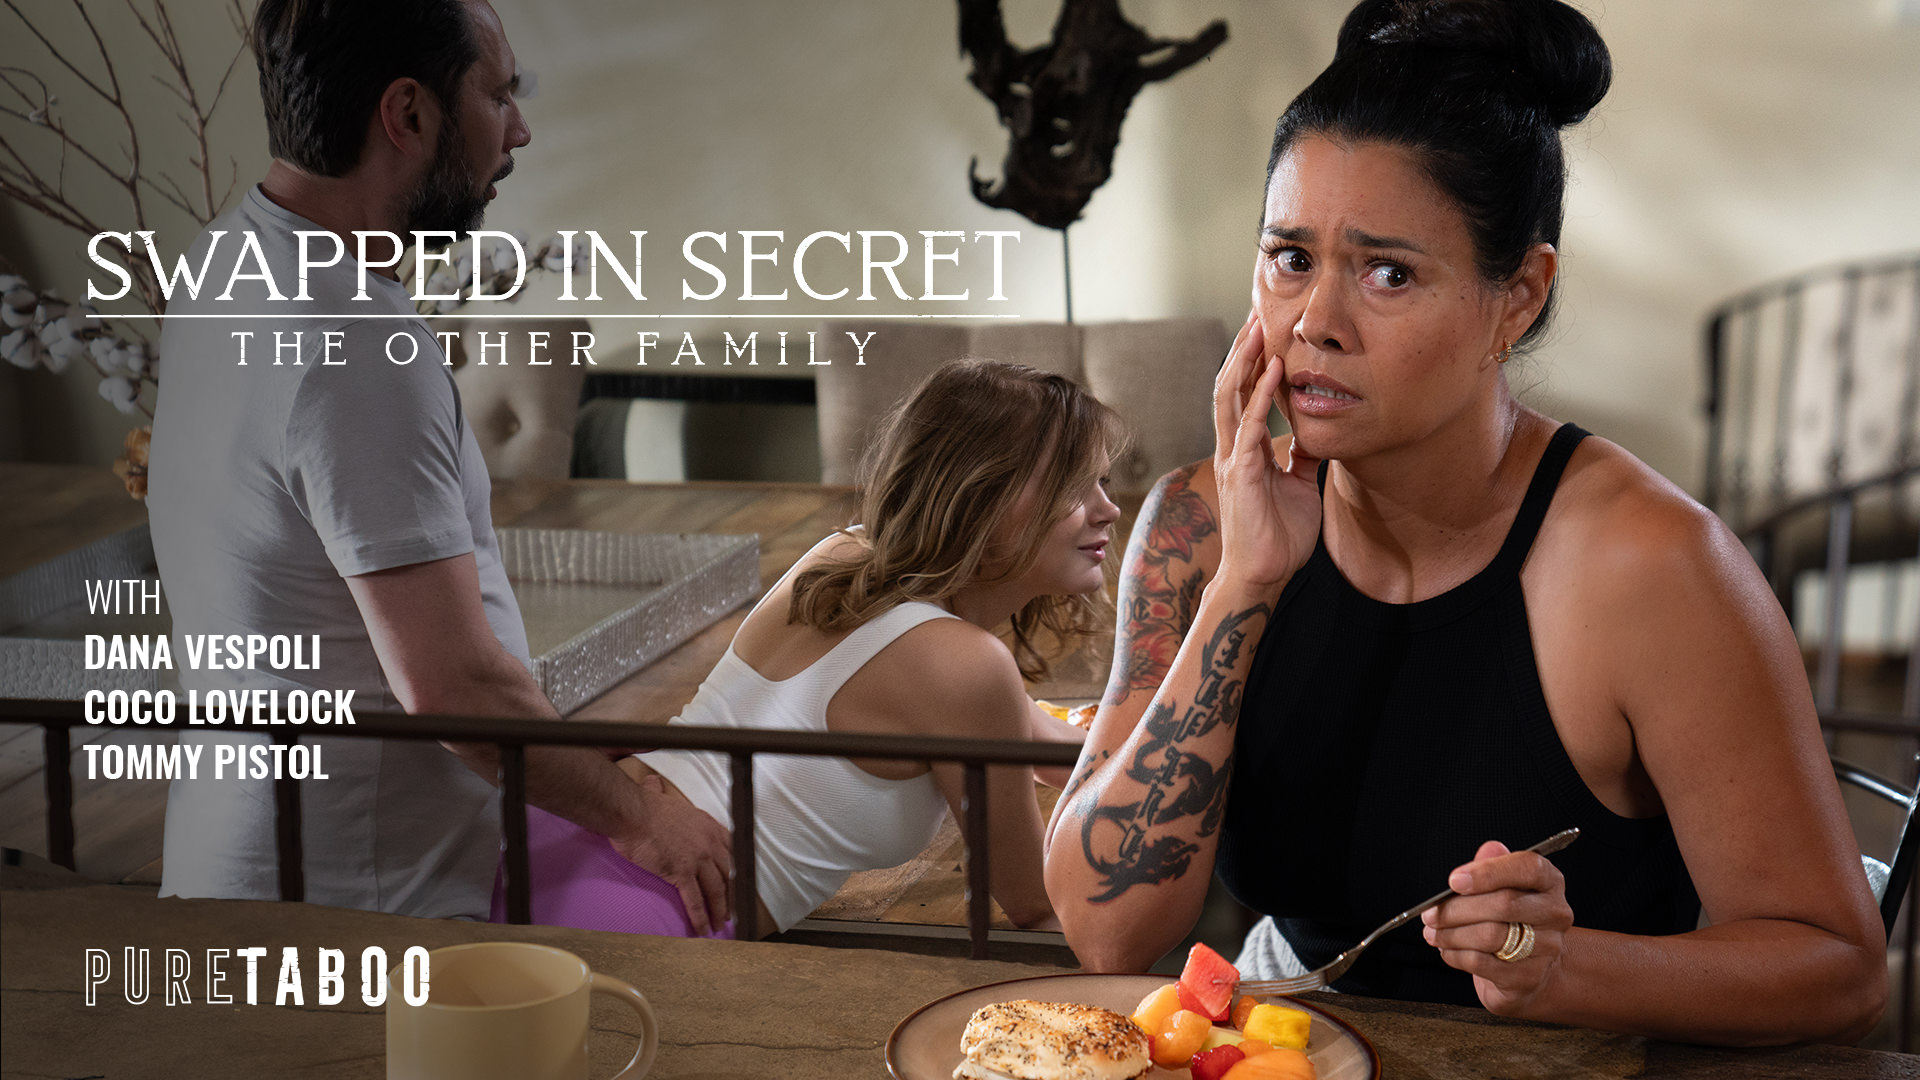 Pure Taboo Tommy Pistol, Coco Lovelock, Dana Vespoli Swapped In Secret: The Other Family